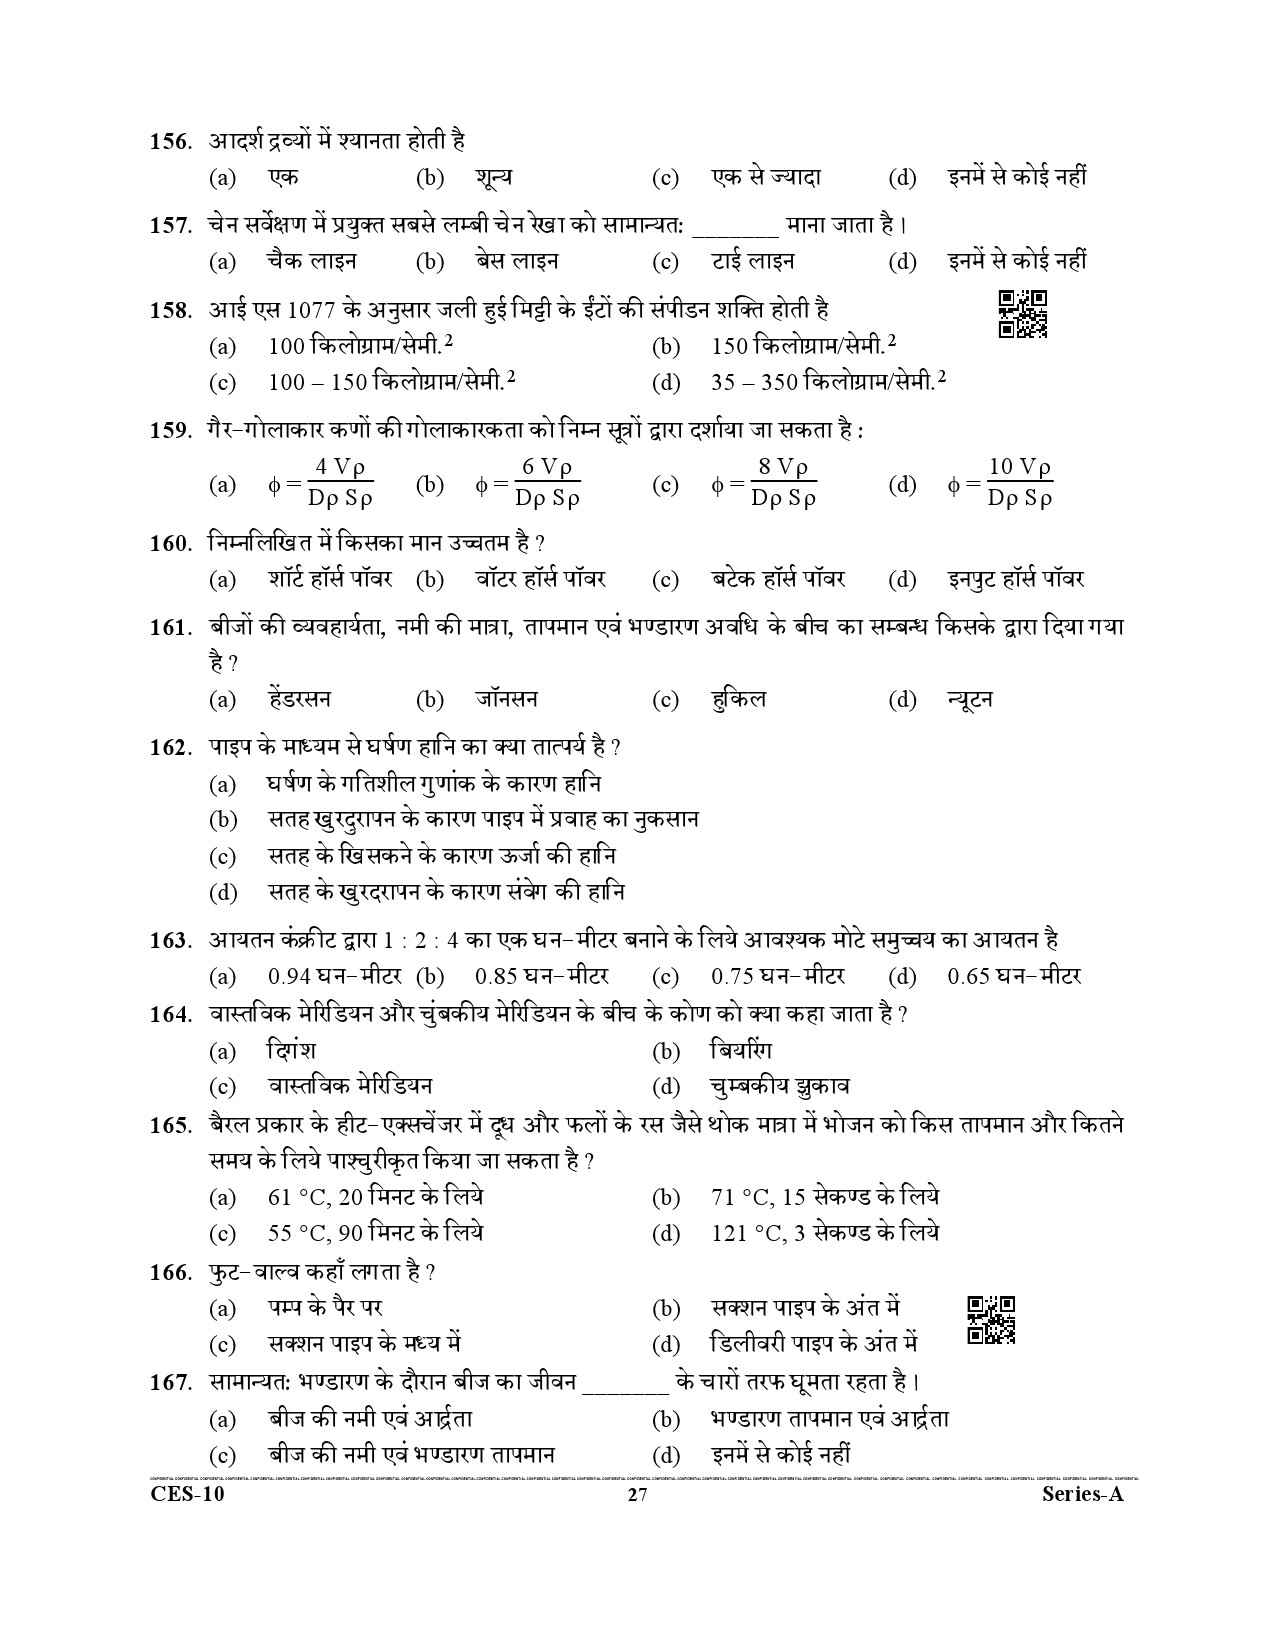 Uttarakhand Combined State Engineering Service Exam 2021 Agriculture Engineering Paper I 27